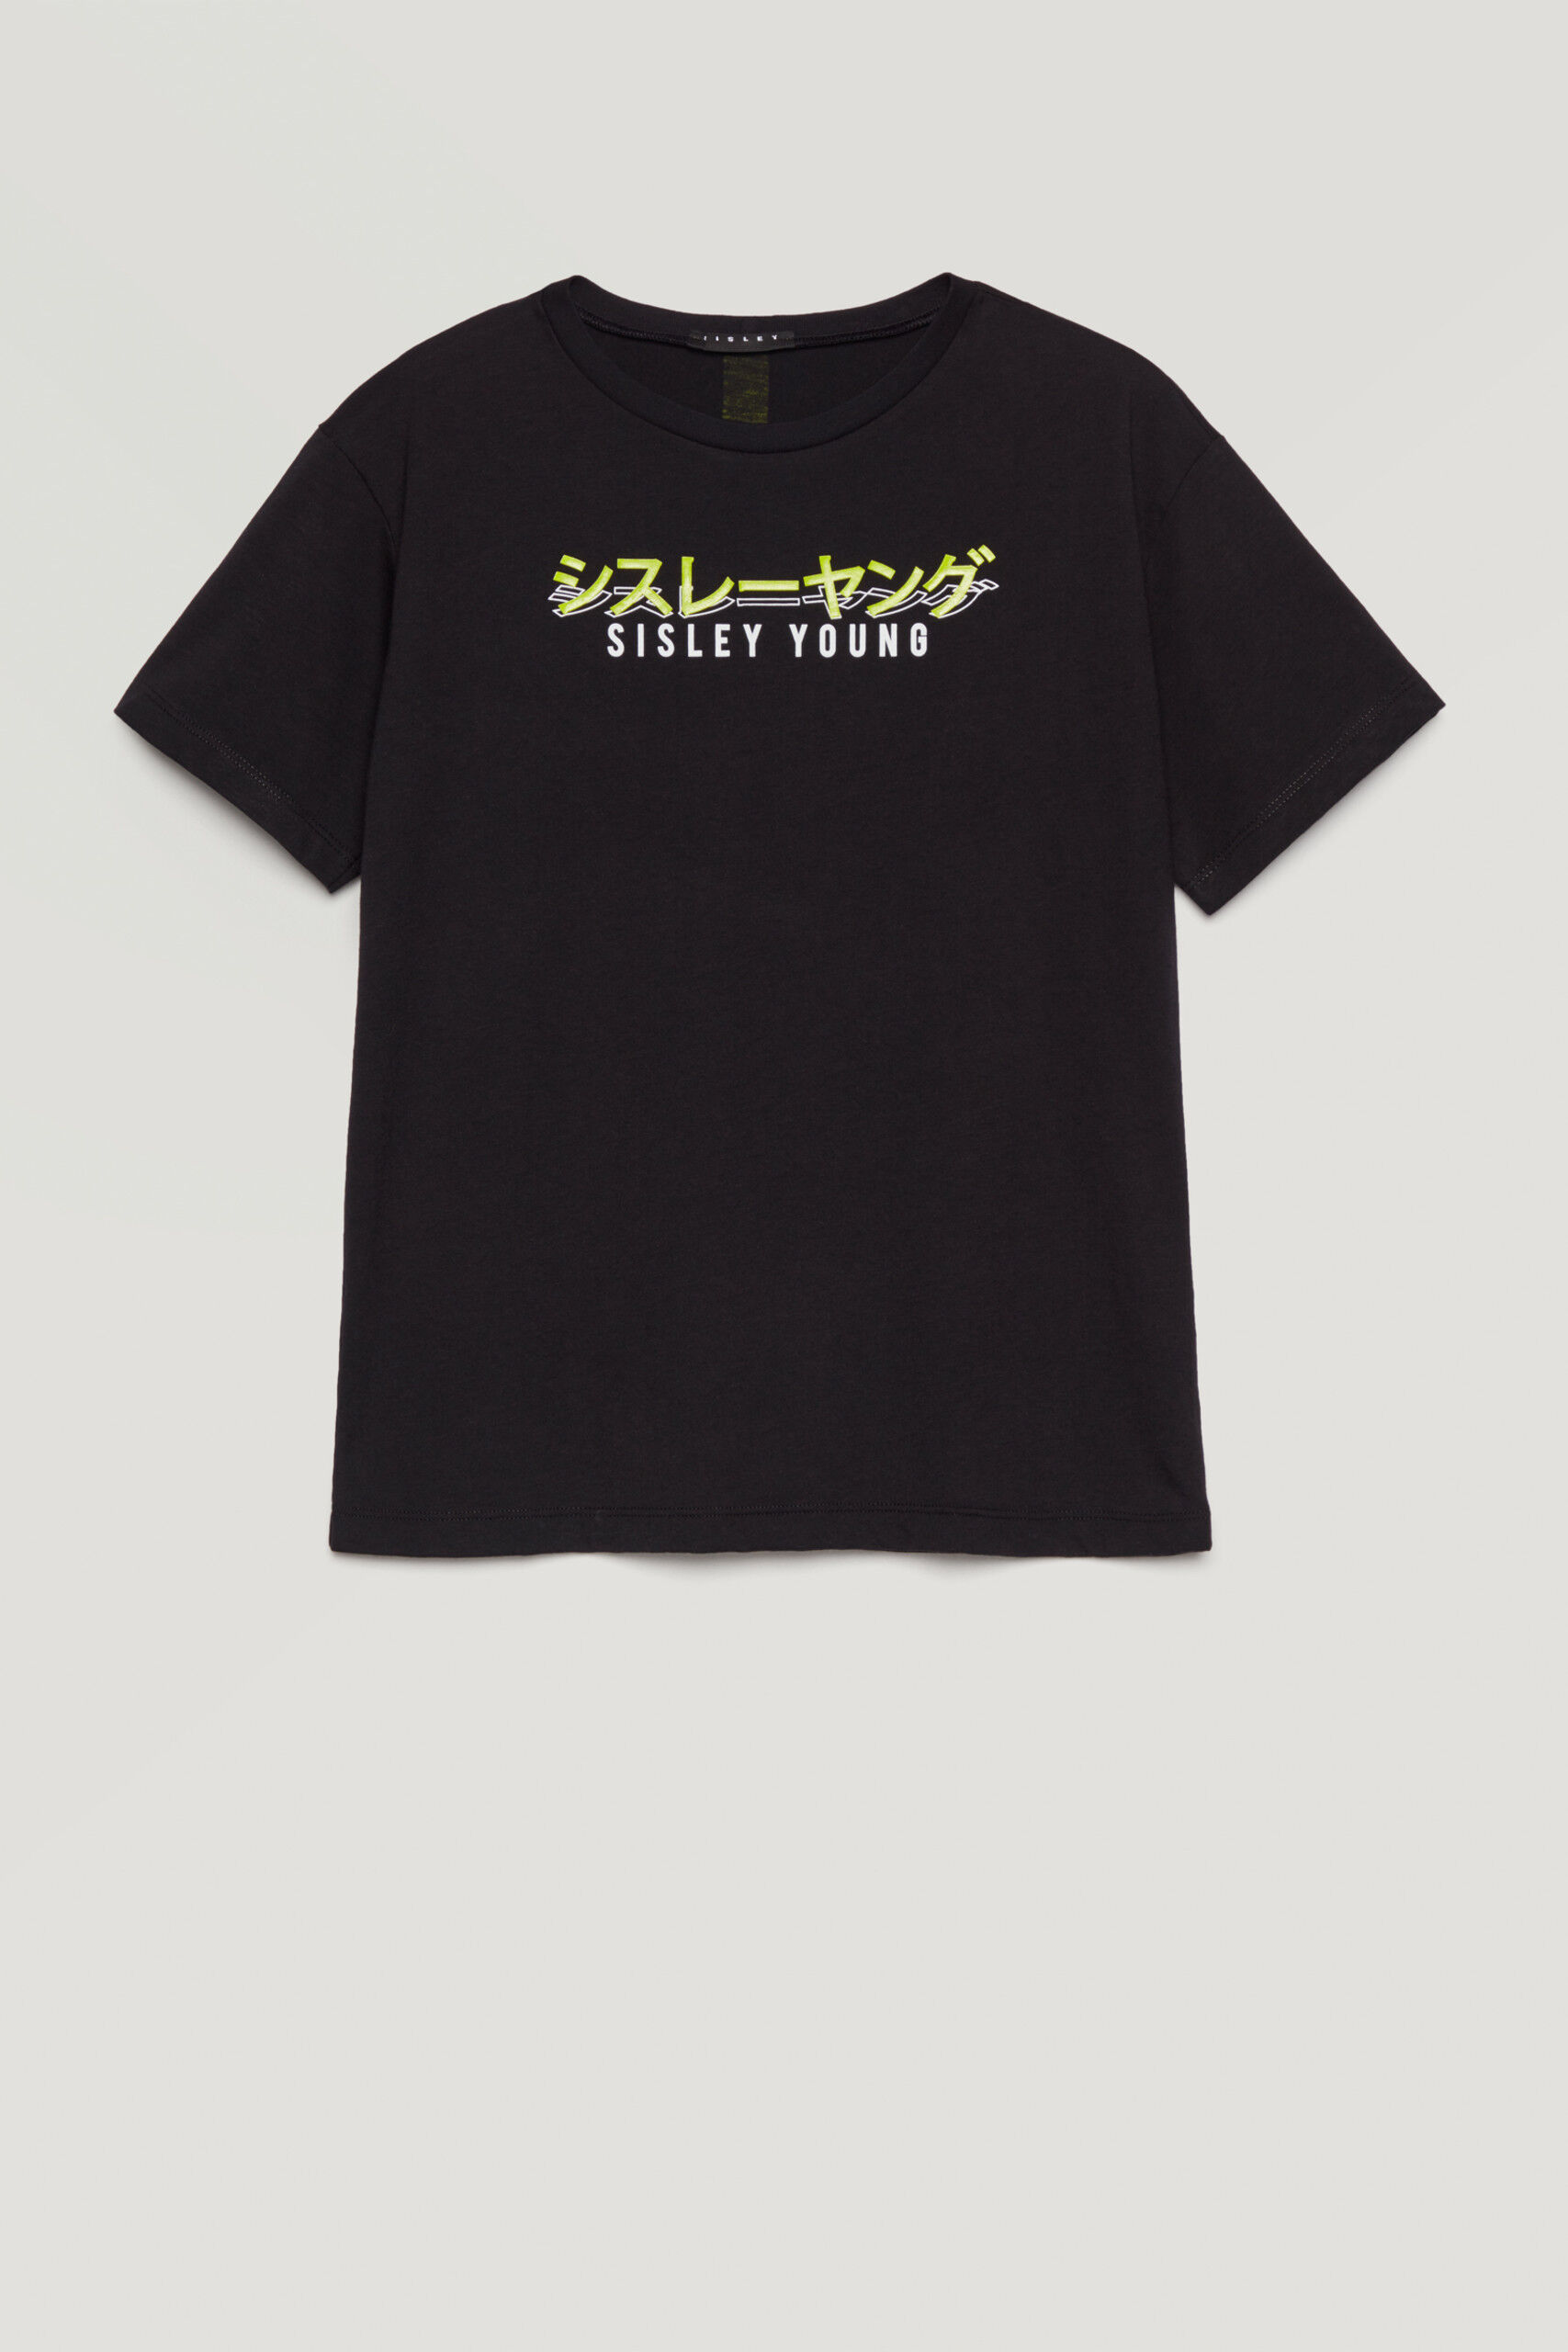 Boys' T-shirts and Tops Collection 2021 | Sisley Young